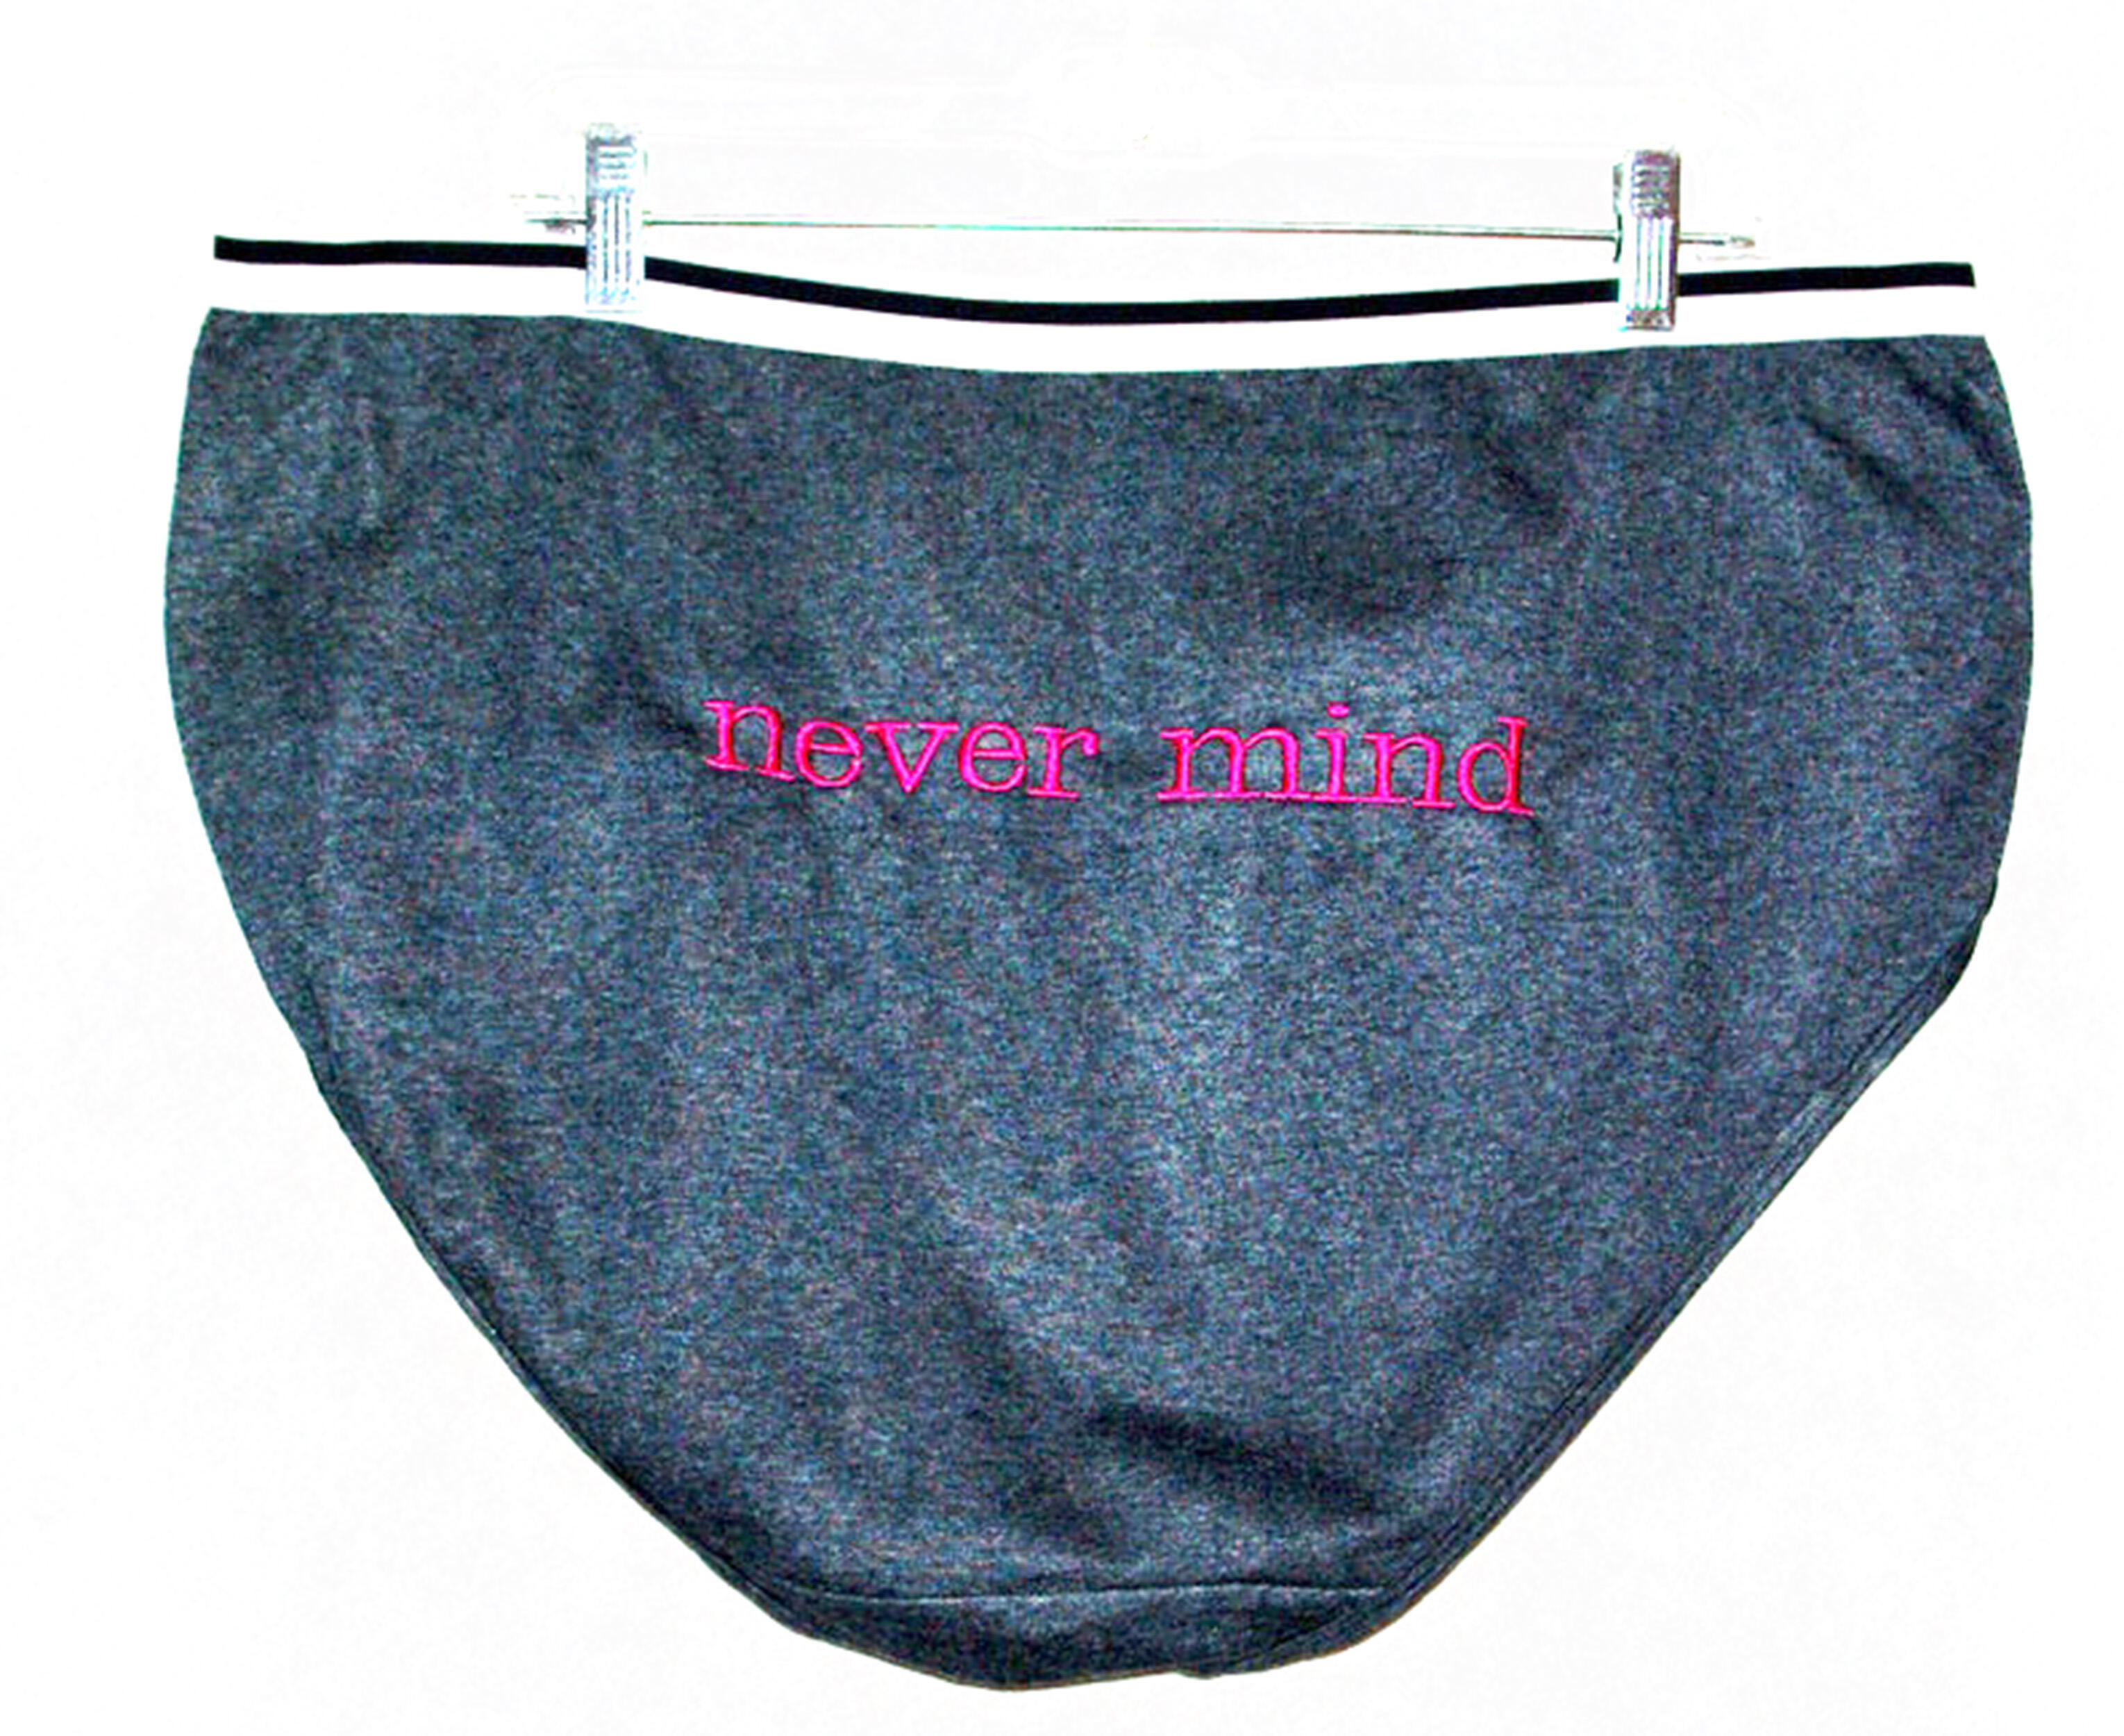 Custom Panties Personalized Panties Personalized Lingerie Gift for Her  Bachelorette Gift Bridal Panties Girlfriend Gift 